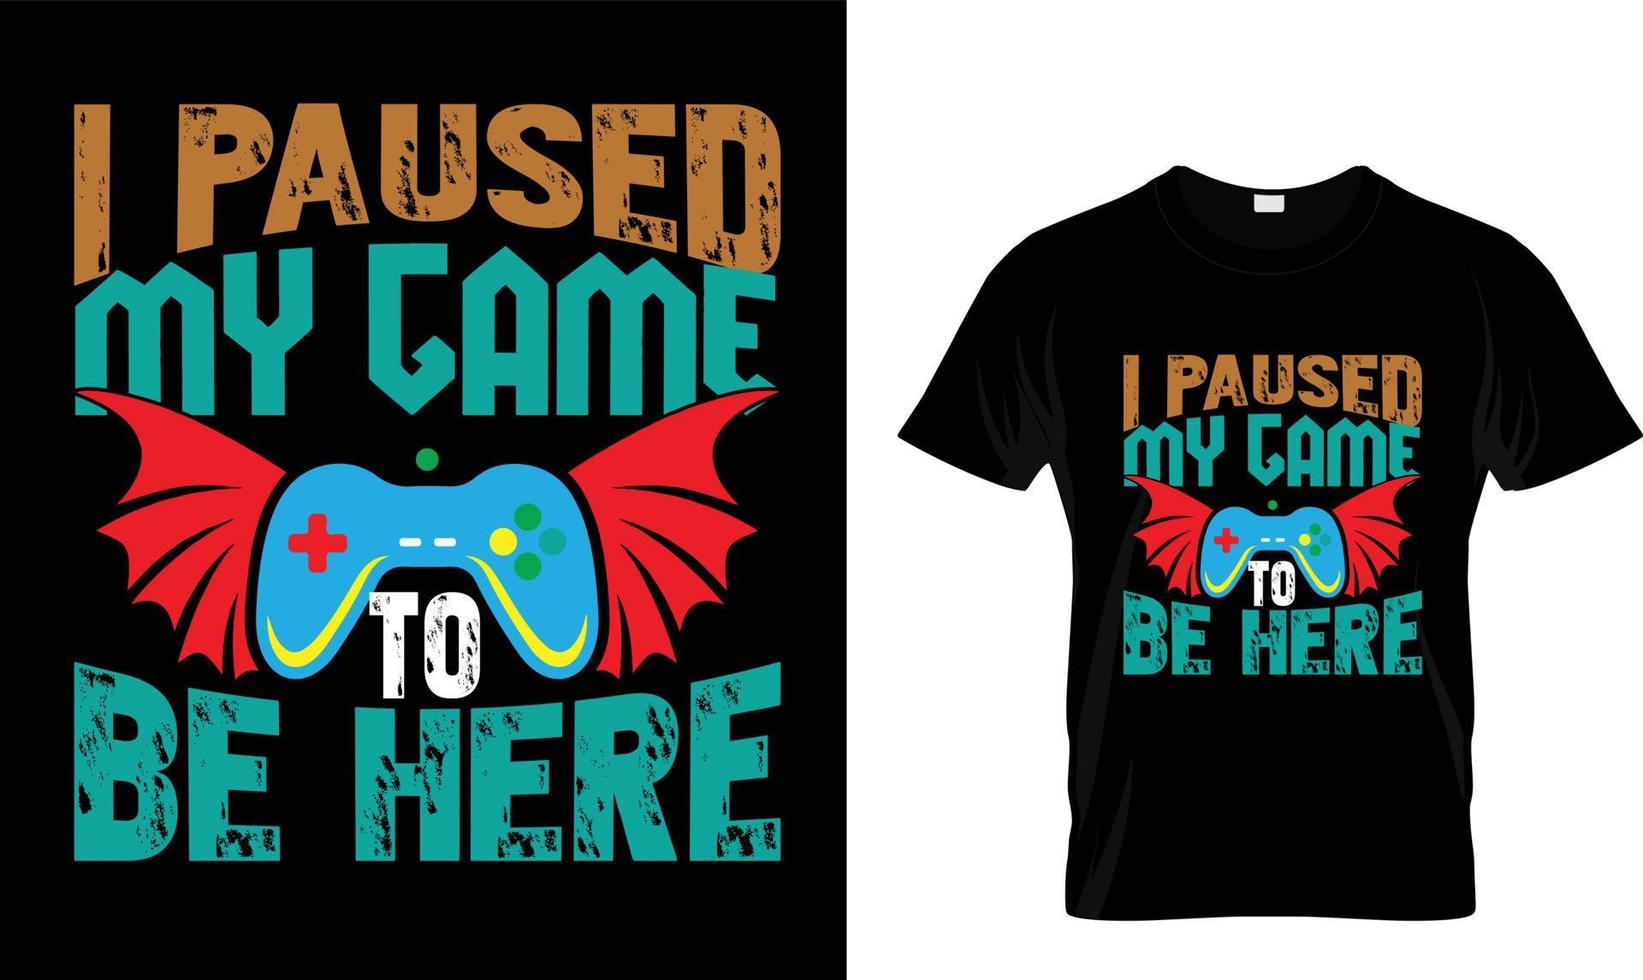 I paused my game to be here T-shirt  design vector